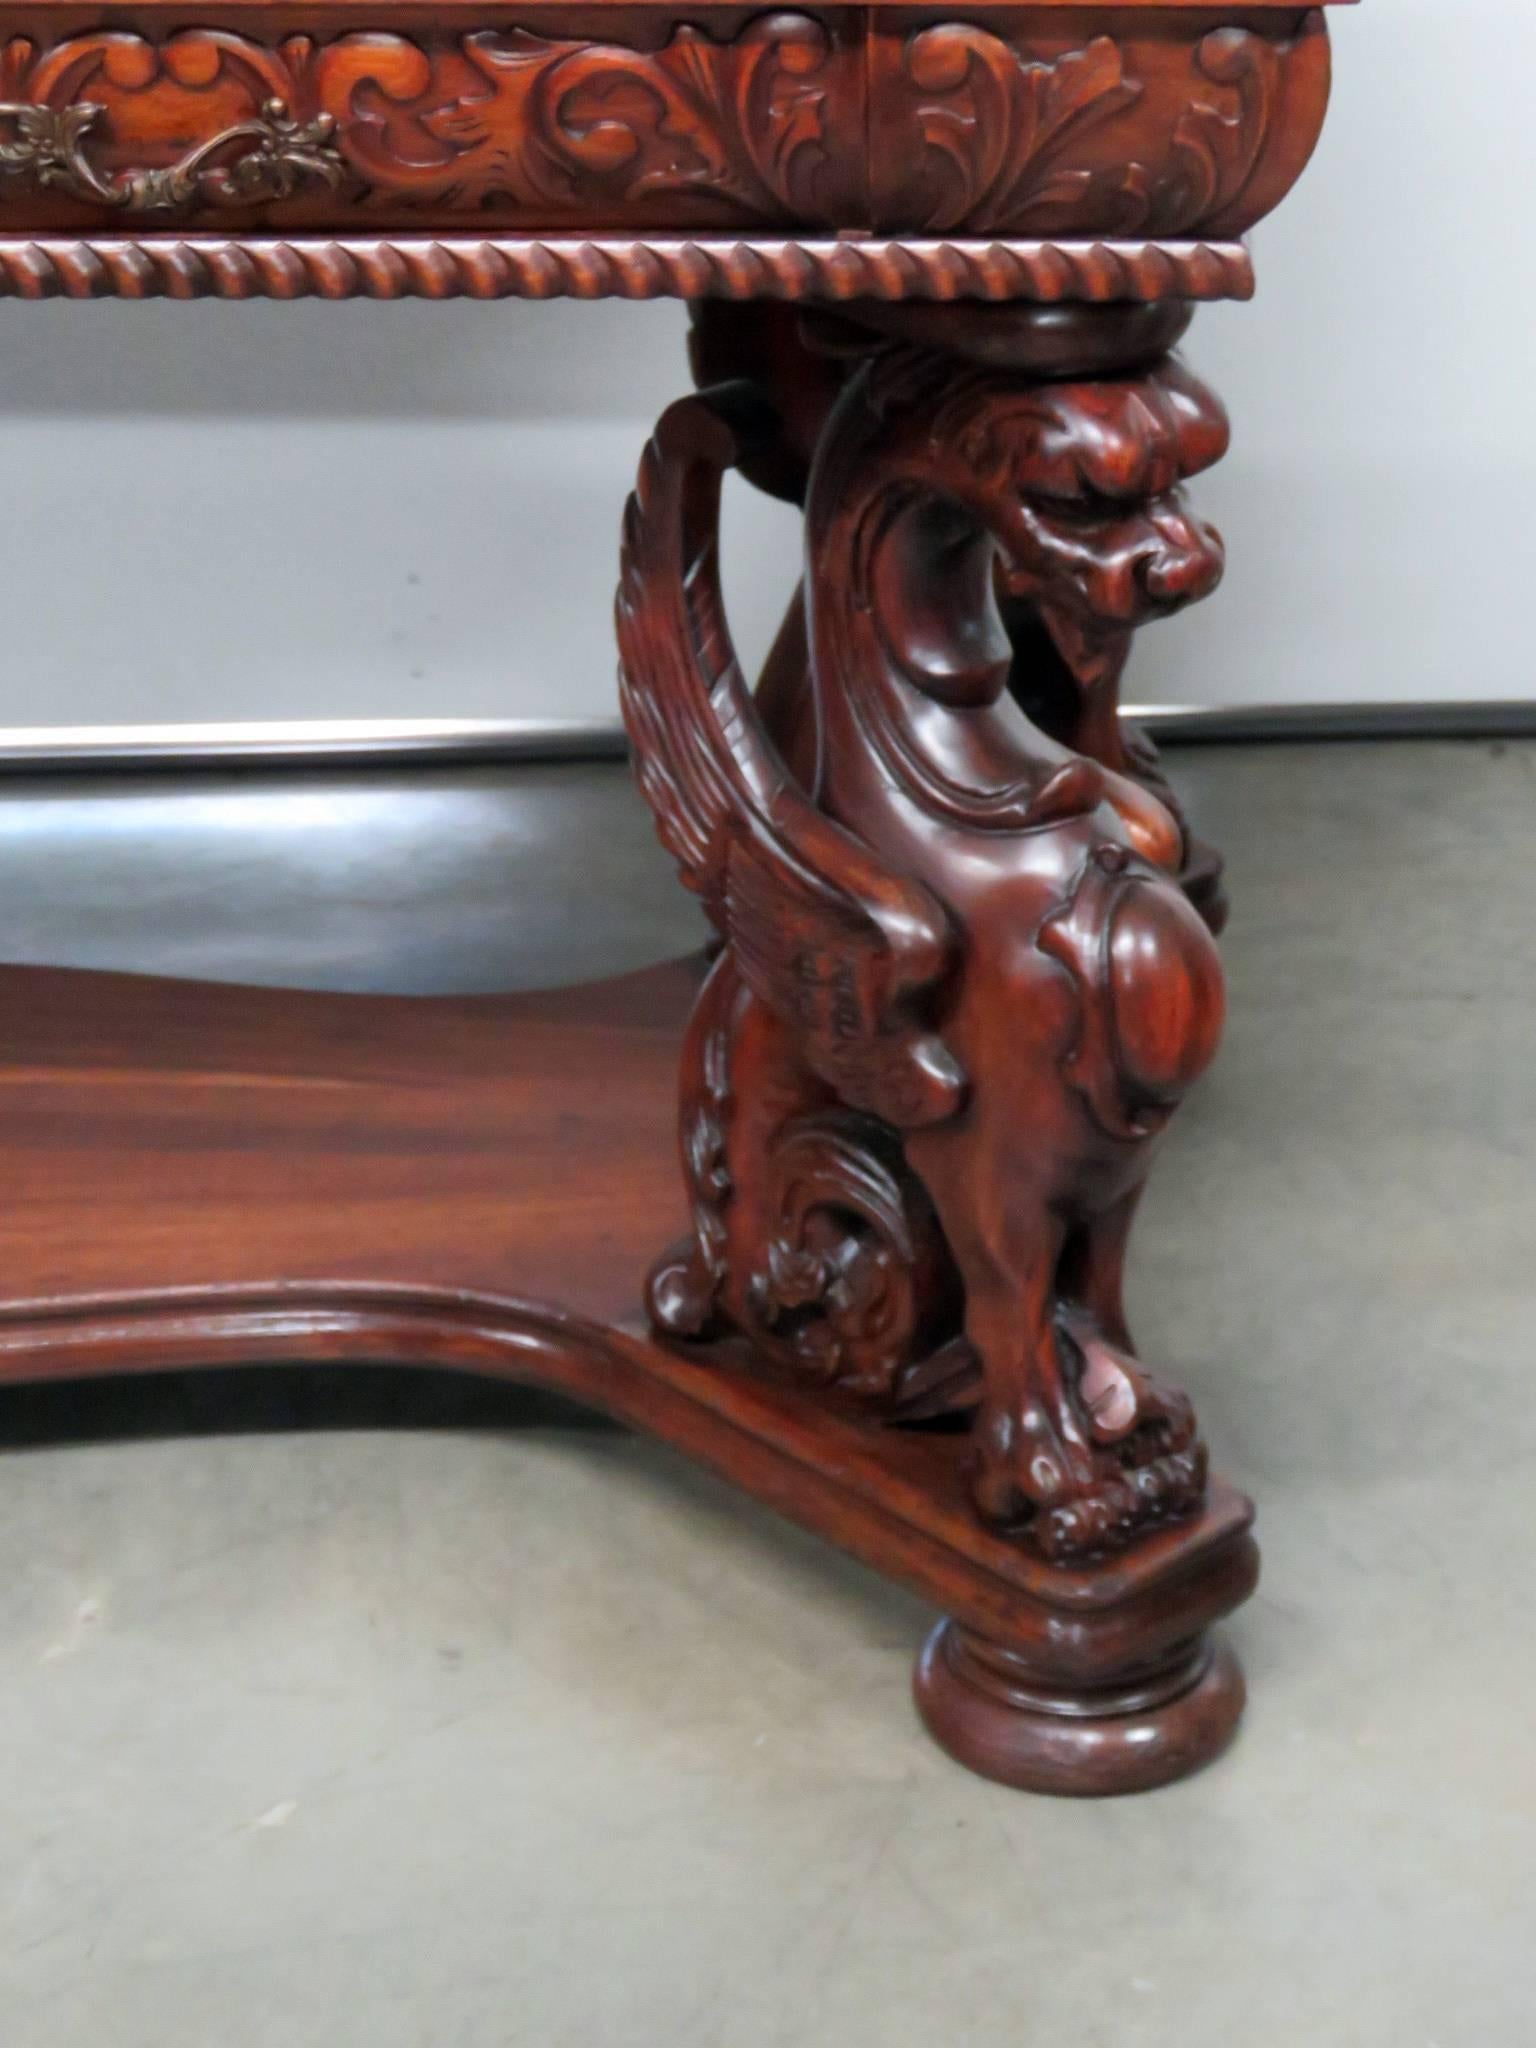 This is an iconic RJ Horner desk. This classic RJ Horner Renaissance style carved mahogany winged griffin desk can be used as a center table or writing table. It is beautifully carved of solud mahogany with oak secondary woods and is in good